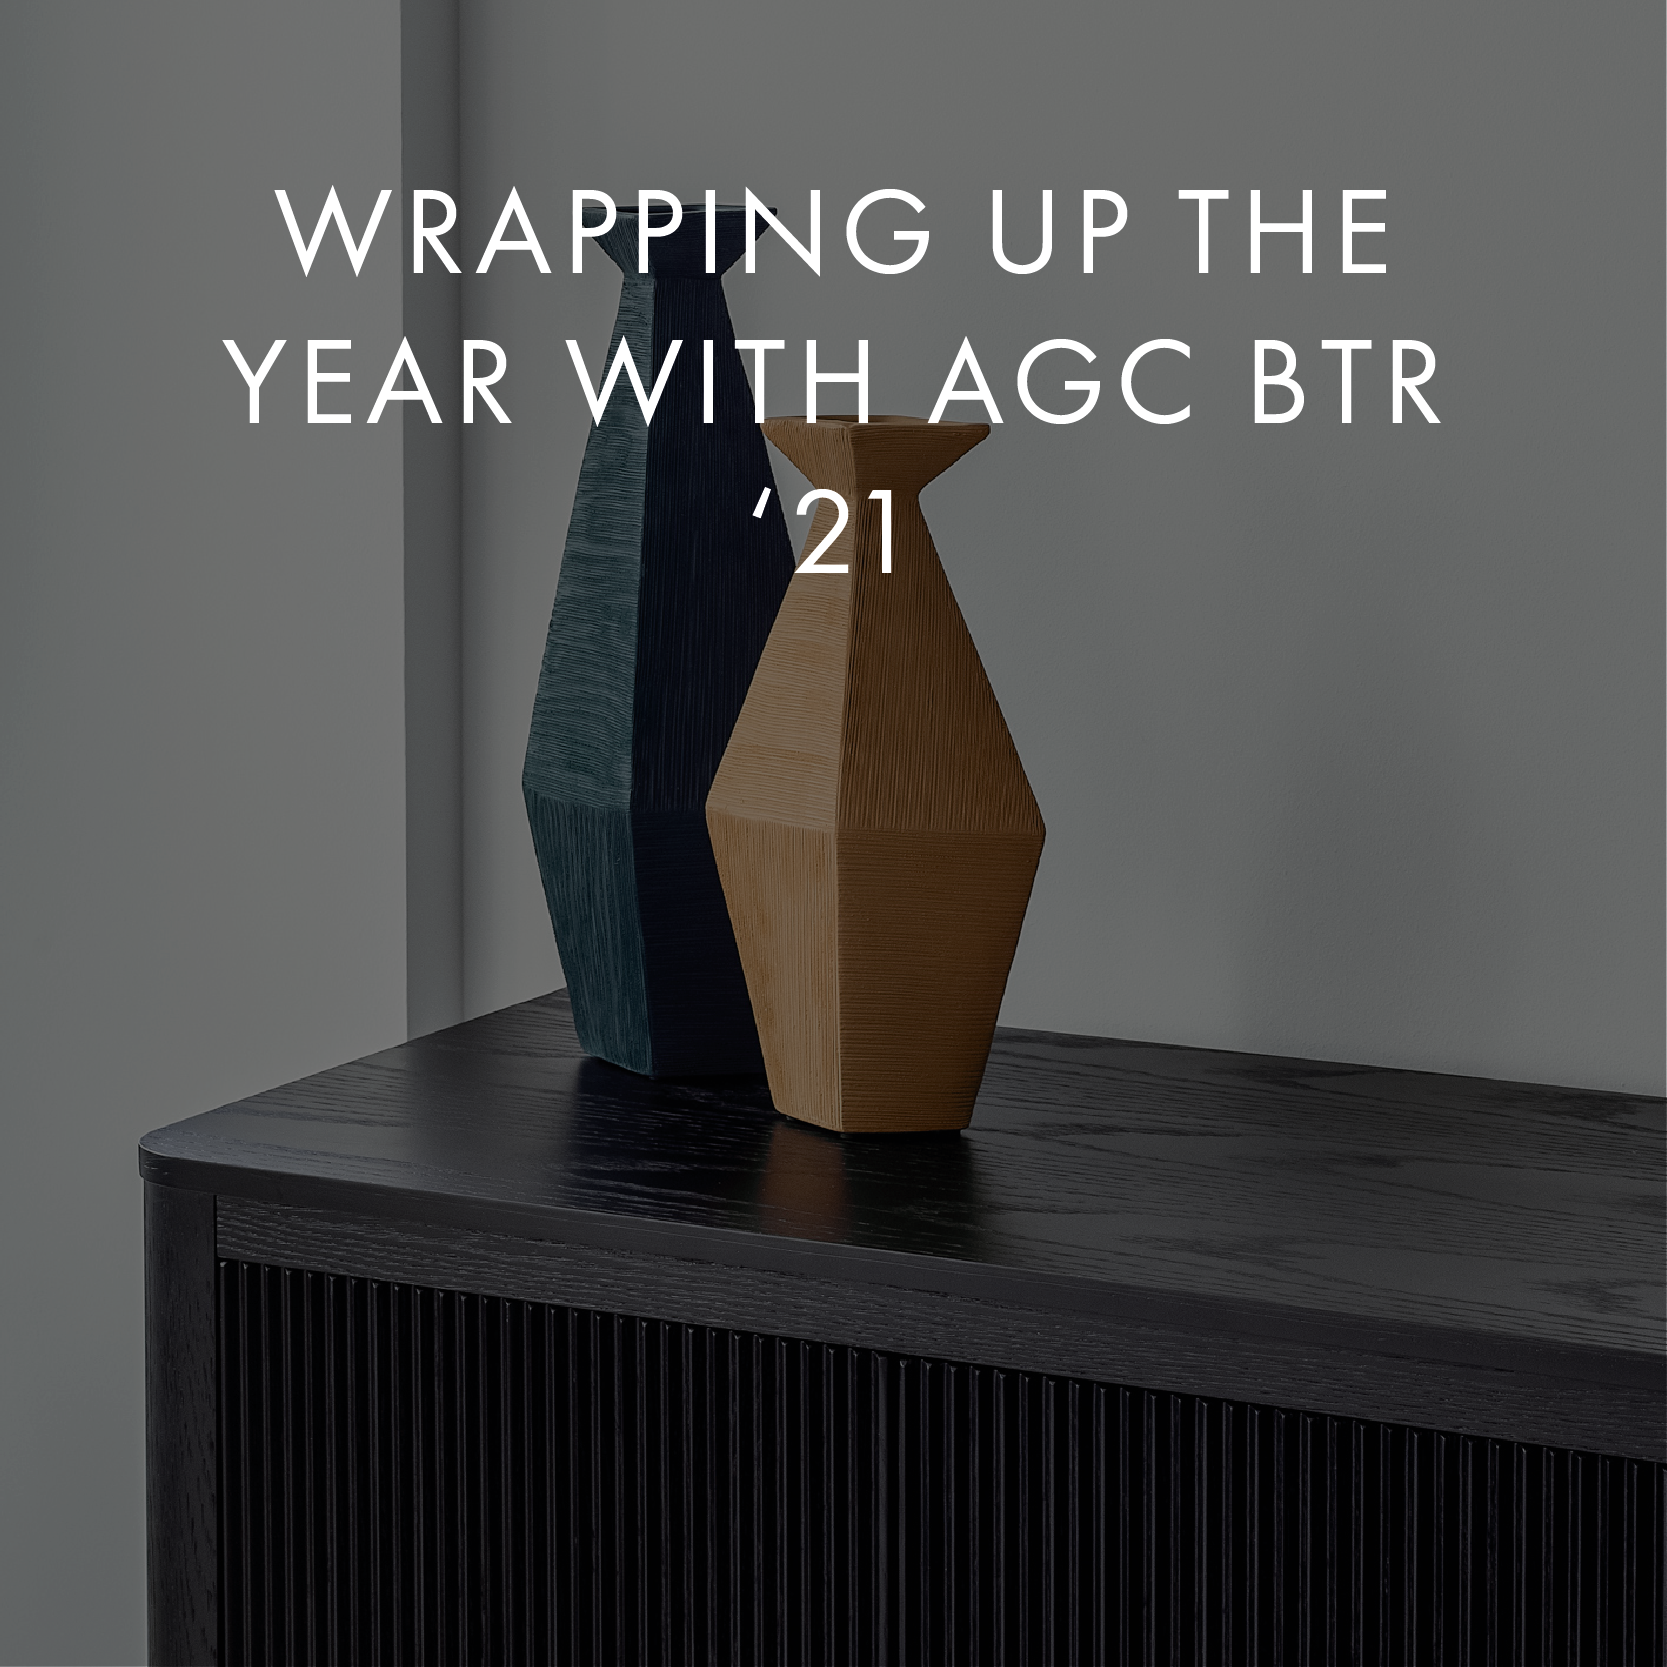 11_wrapping_up_the_year_Artboard 2 copy 5.png